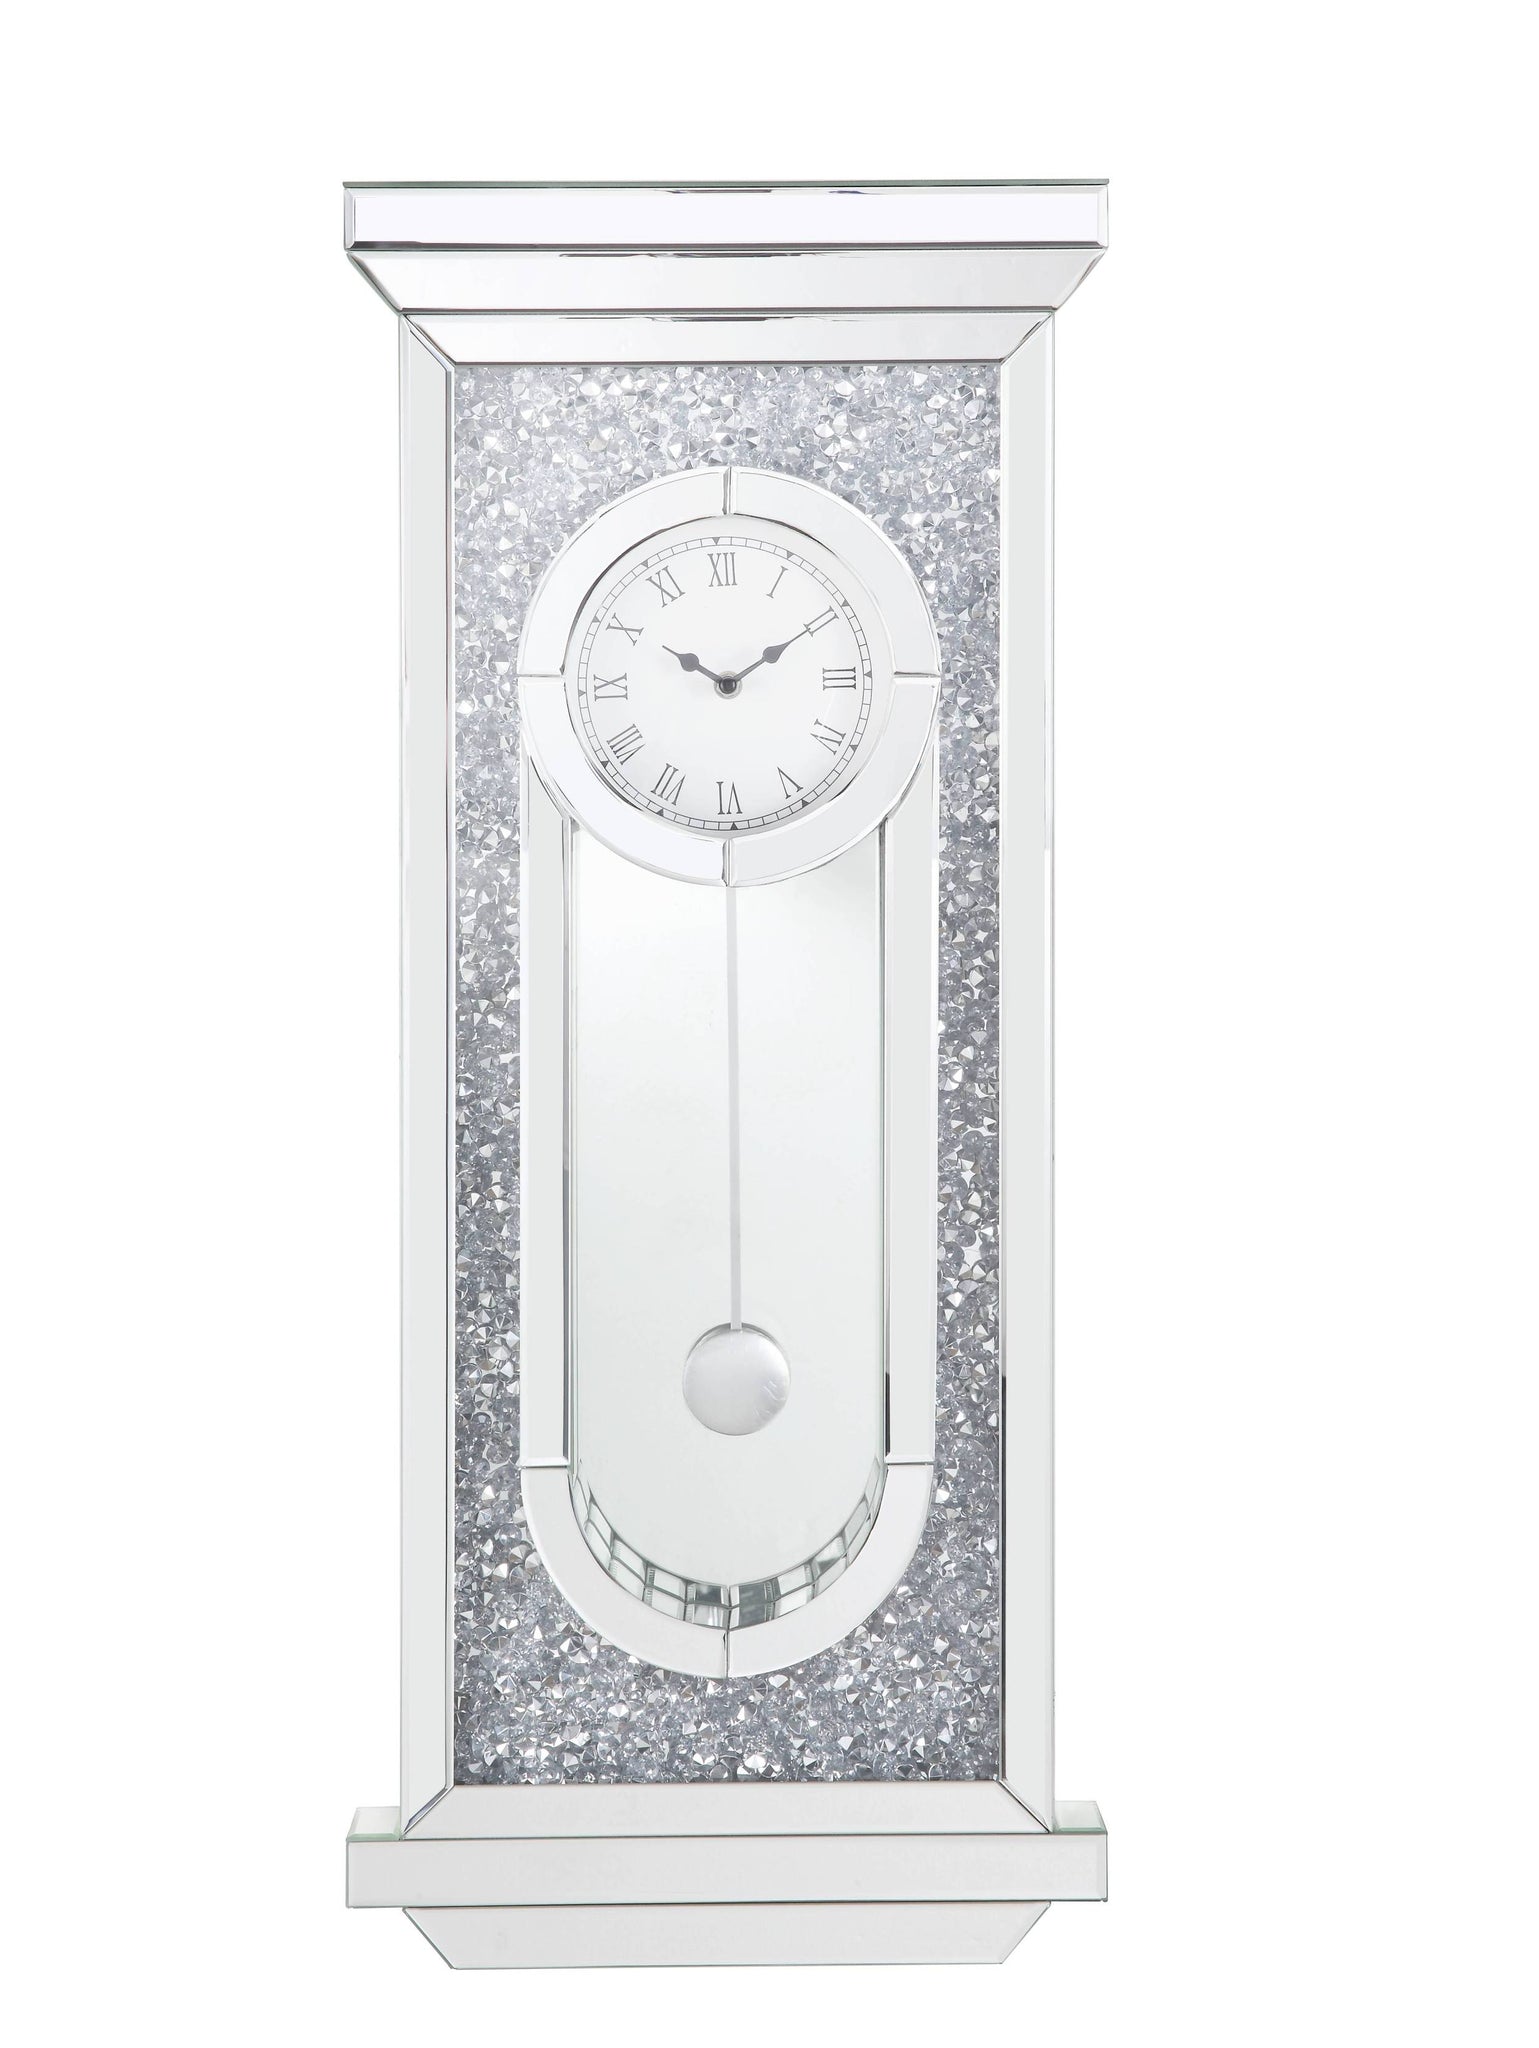 ACME Noralie WALL CLOCK Mirrored & Faux Diamonds silver-glass